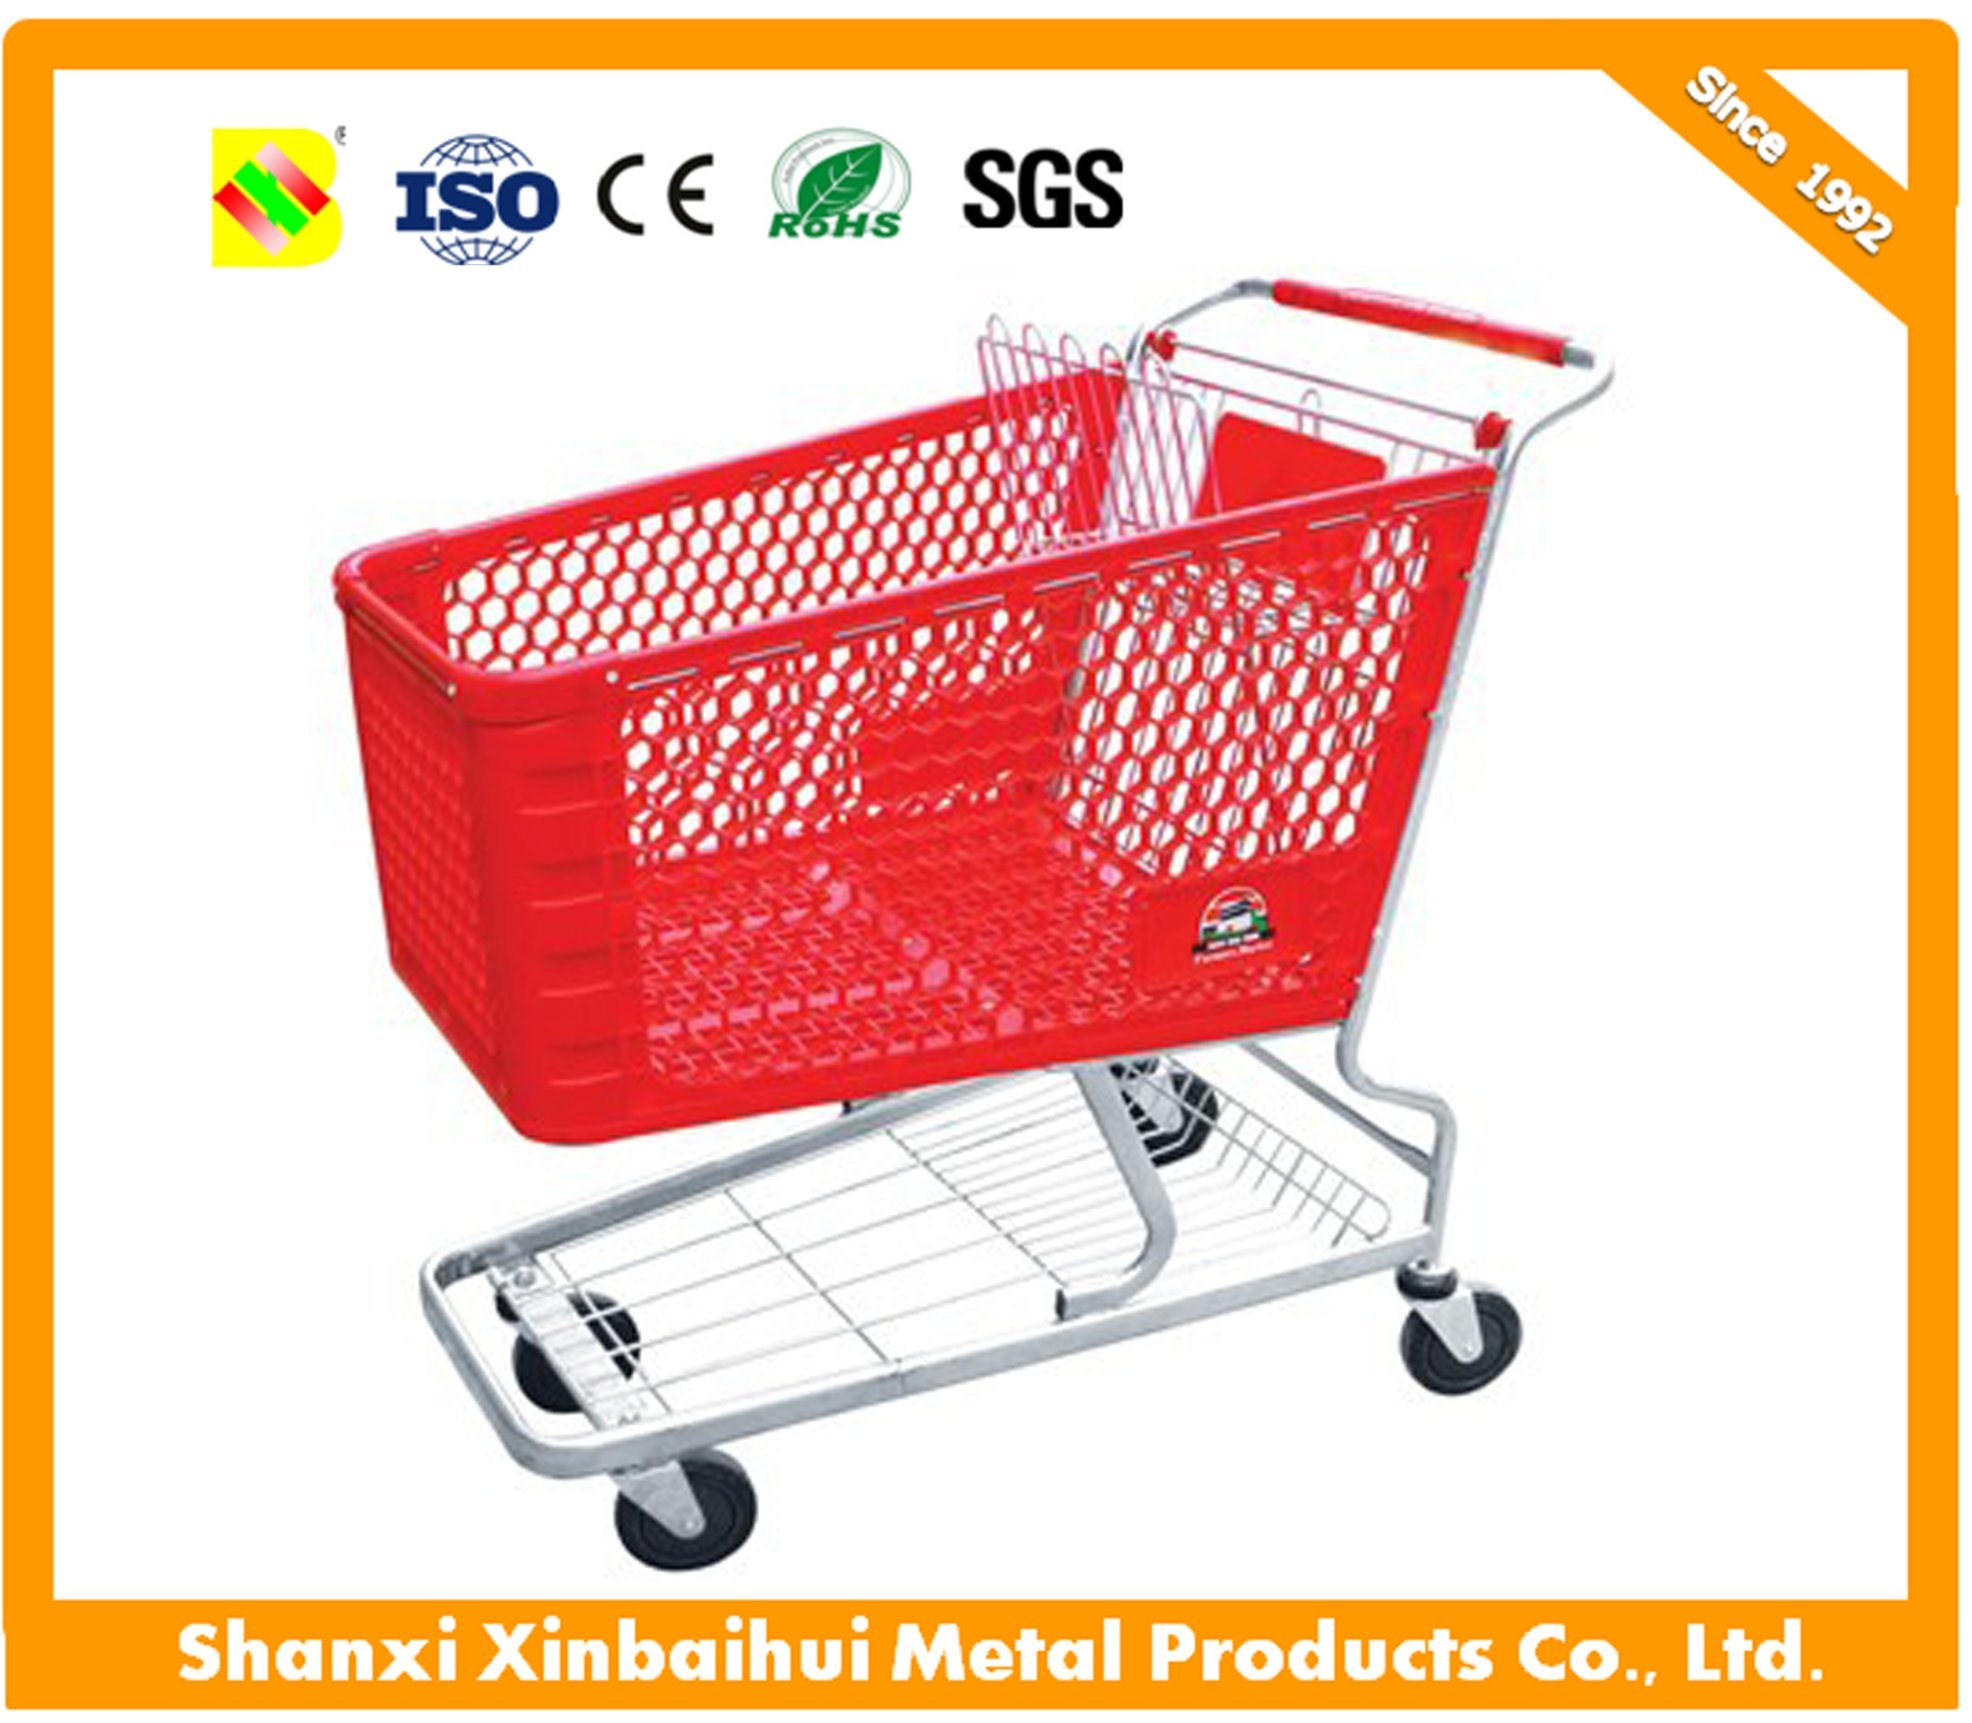 Pure Plastic Hot Sale Market Shopping Trolley with Chair